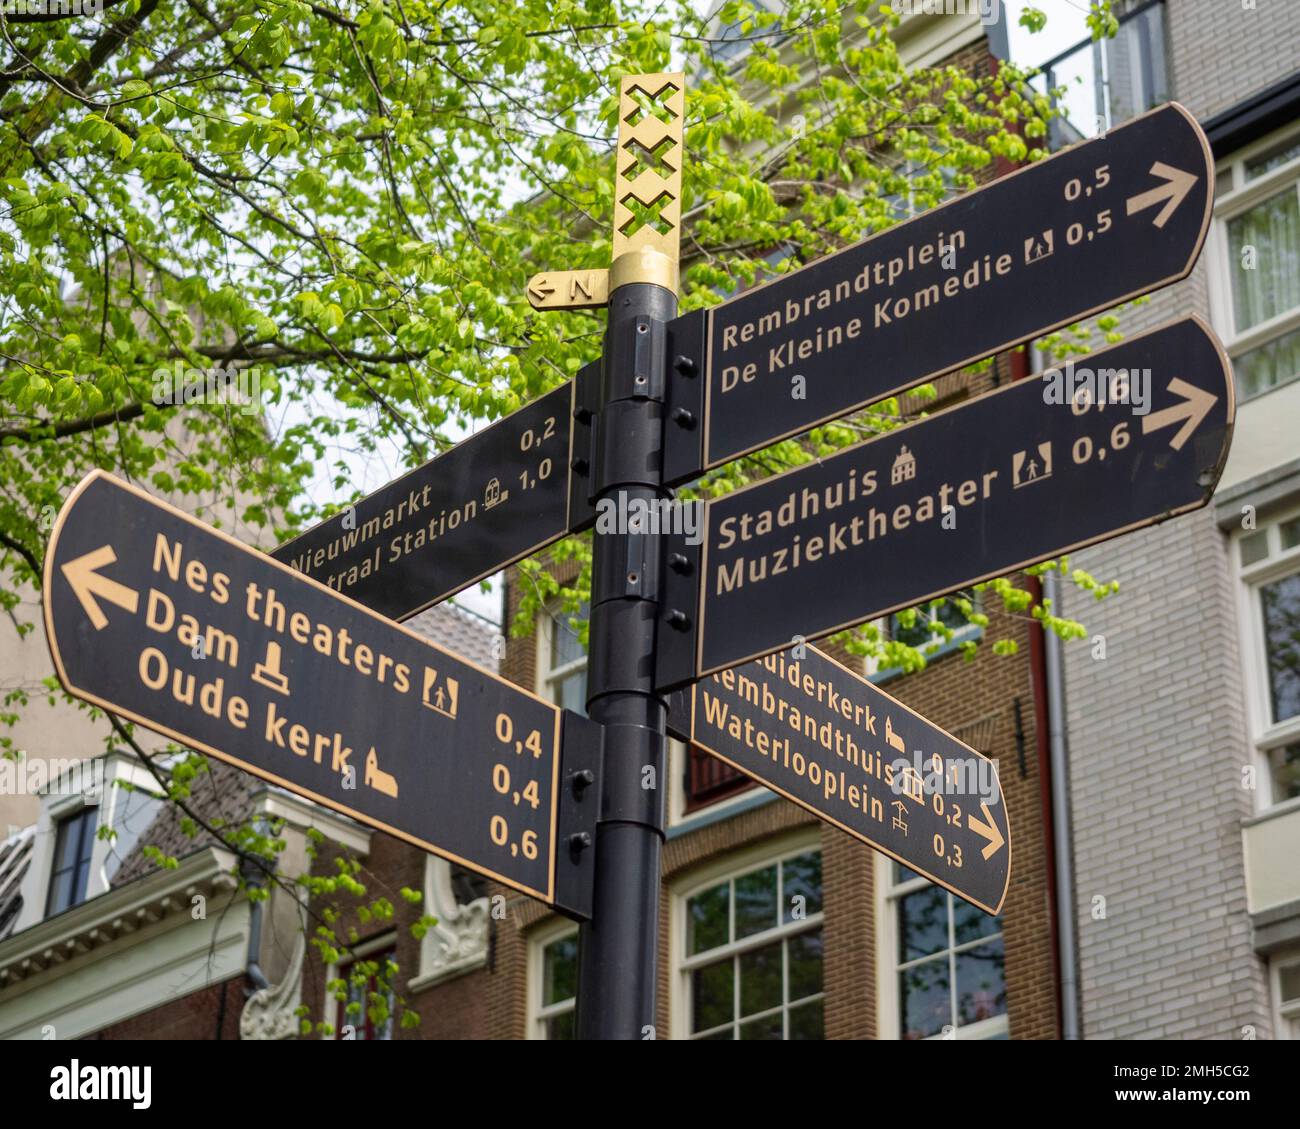 AMSTERDAM, NETHERLANDS - MAY 01, 2018:  Signpost in Central Amsterdam with directions to Oude Kerk and Stadhuis Stock Photo